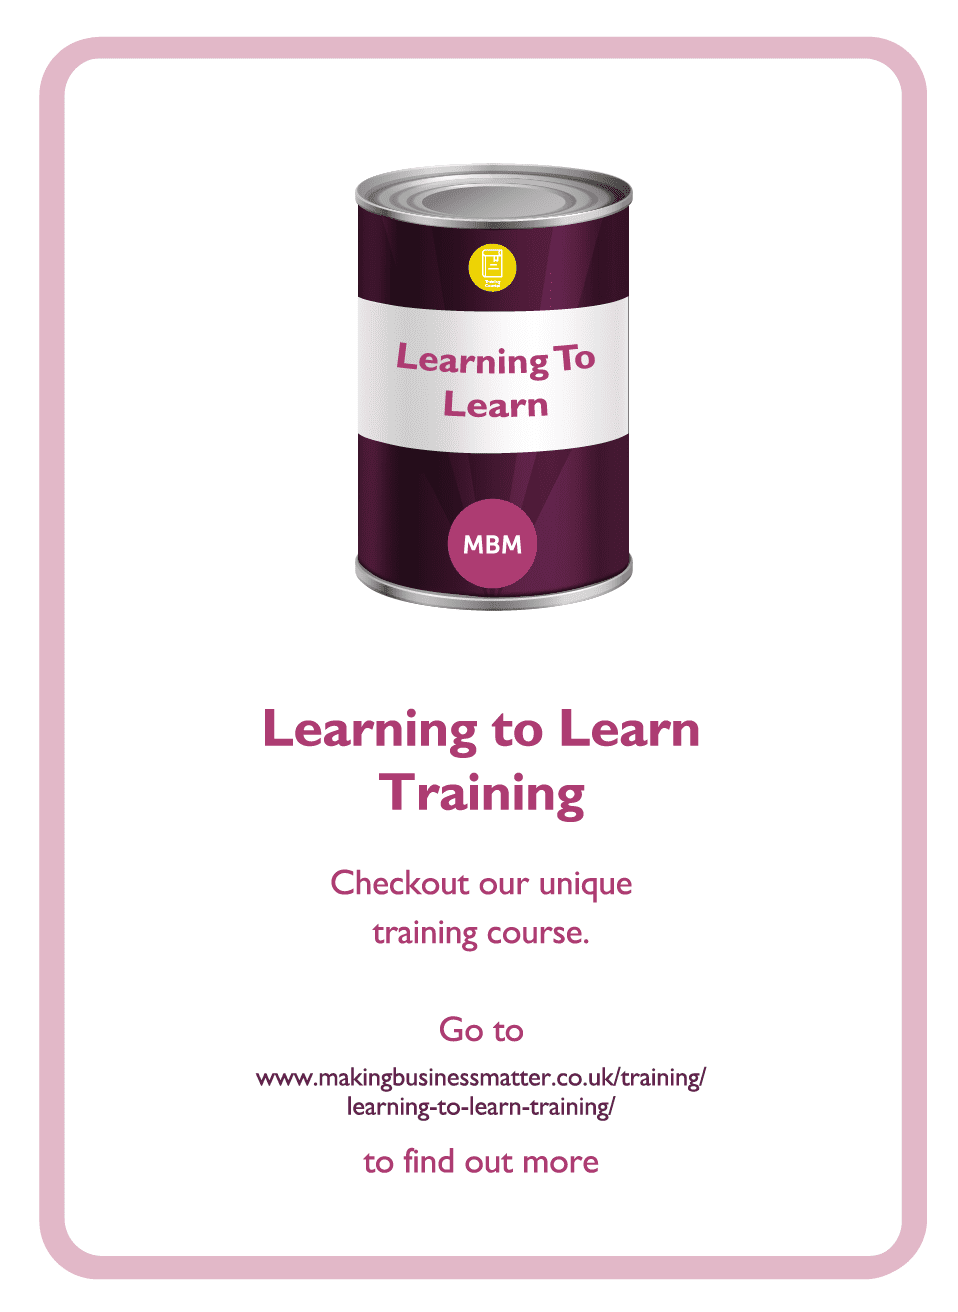 Learning to Learn coaching card titled Learning to Learn